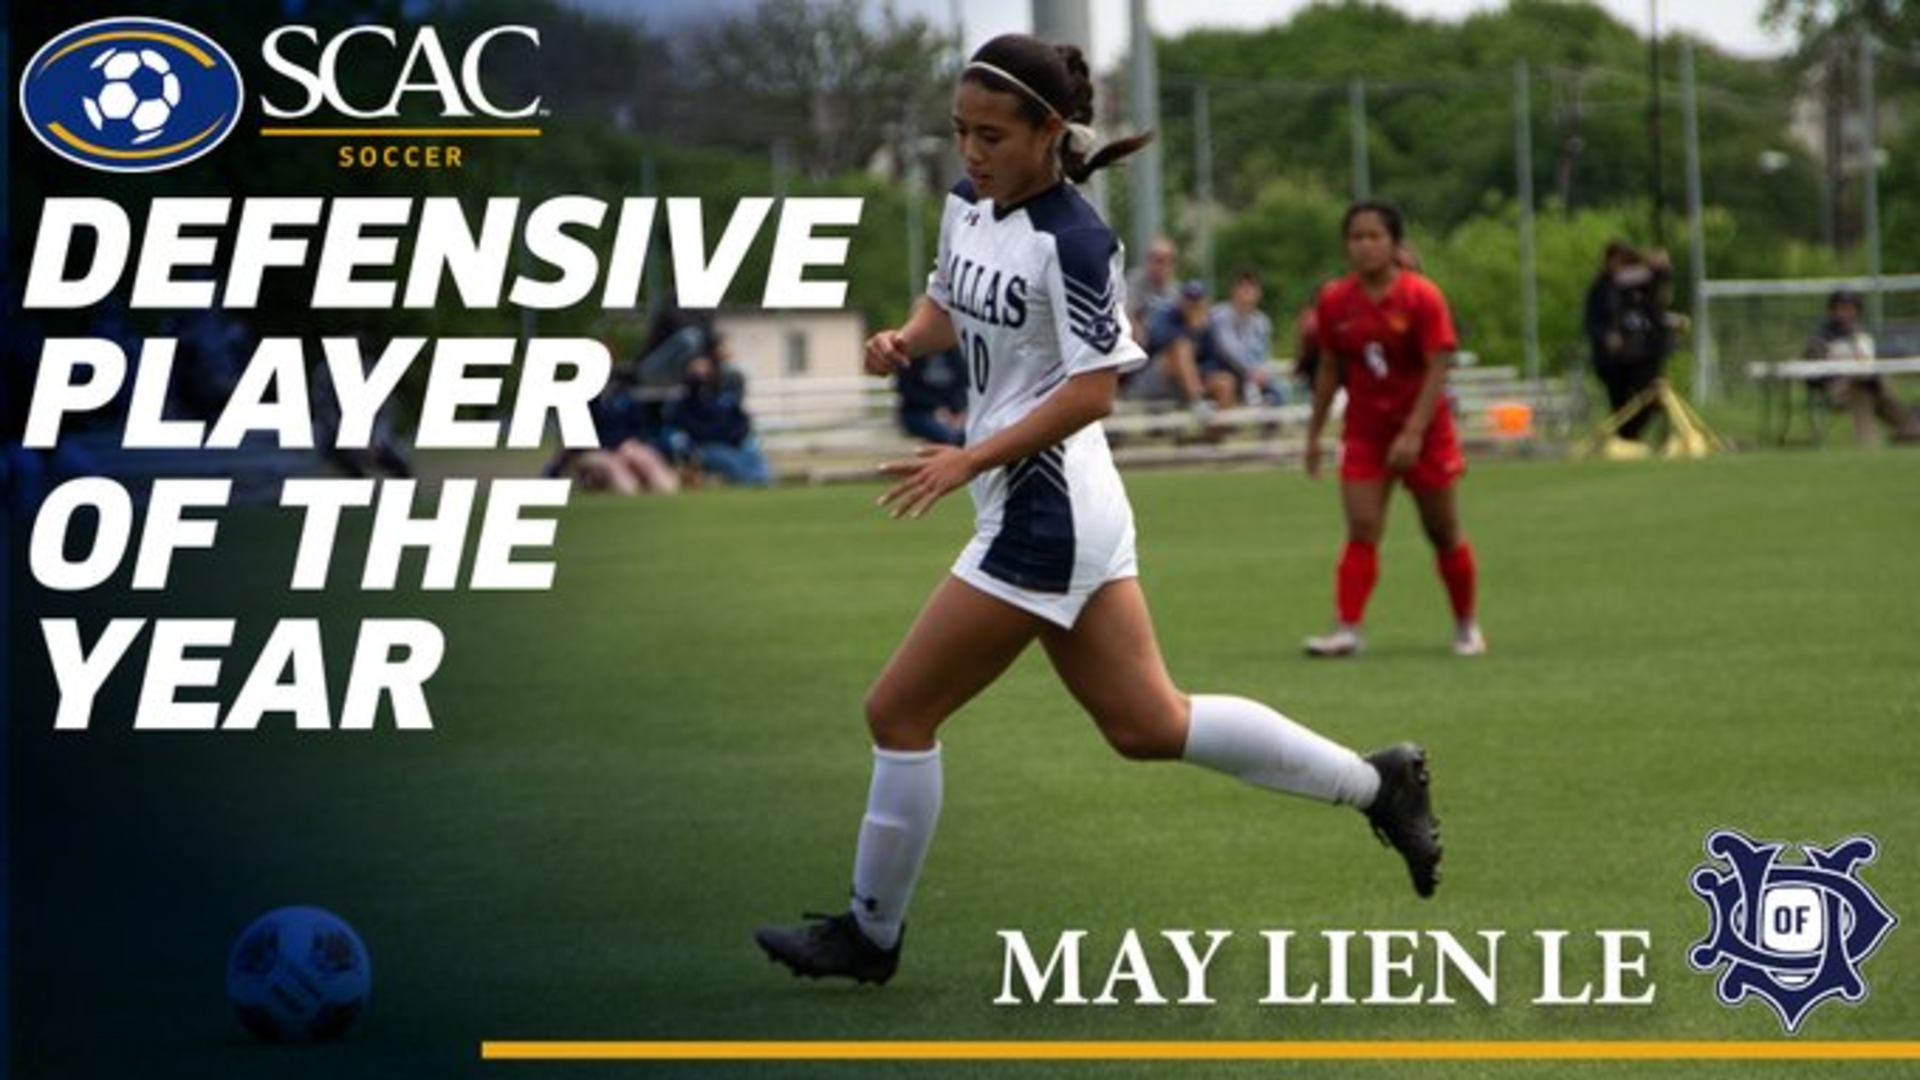 Lien Le Claims SCAC Defensive Player of the Year; Joined Mencacci on 1st Team to Headline Crusader Honors